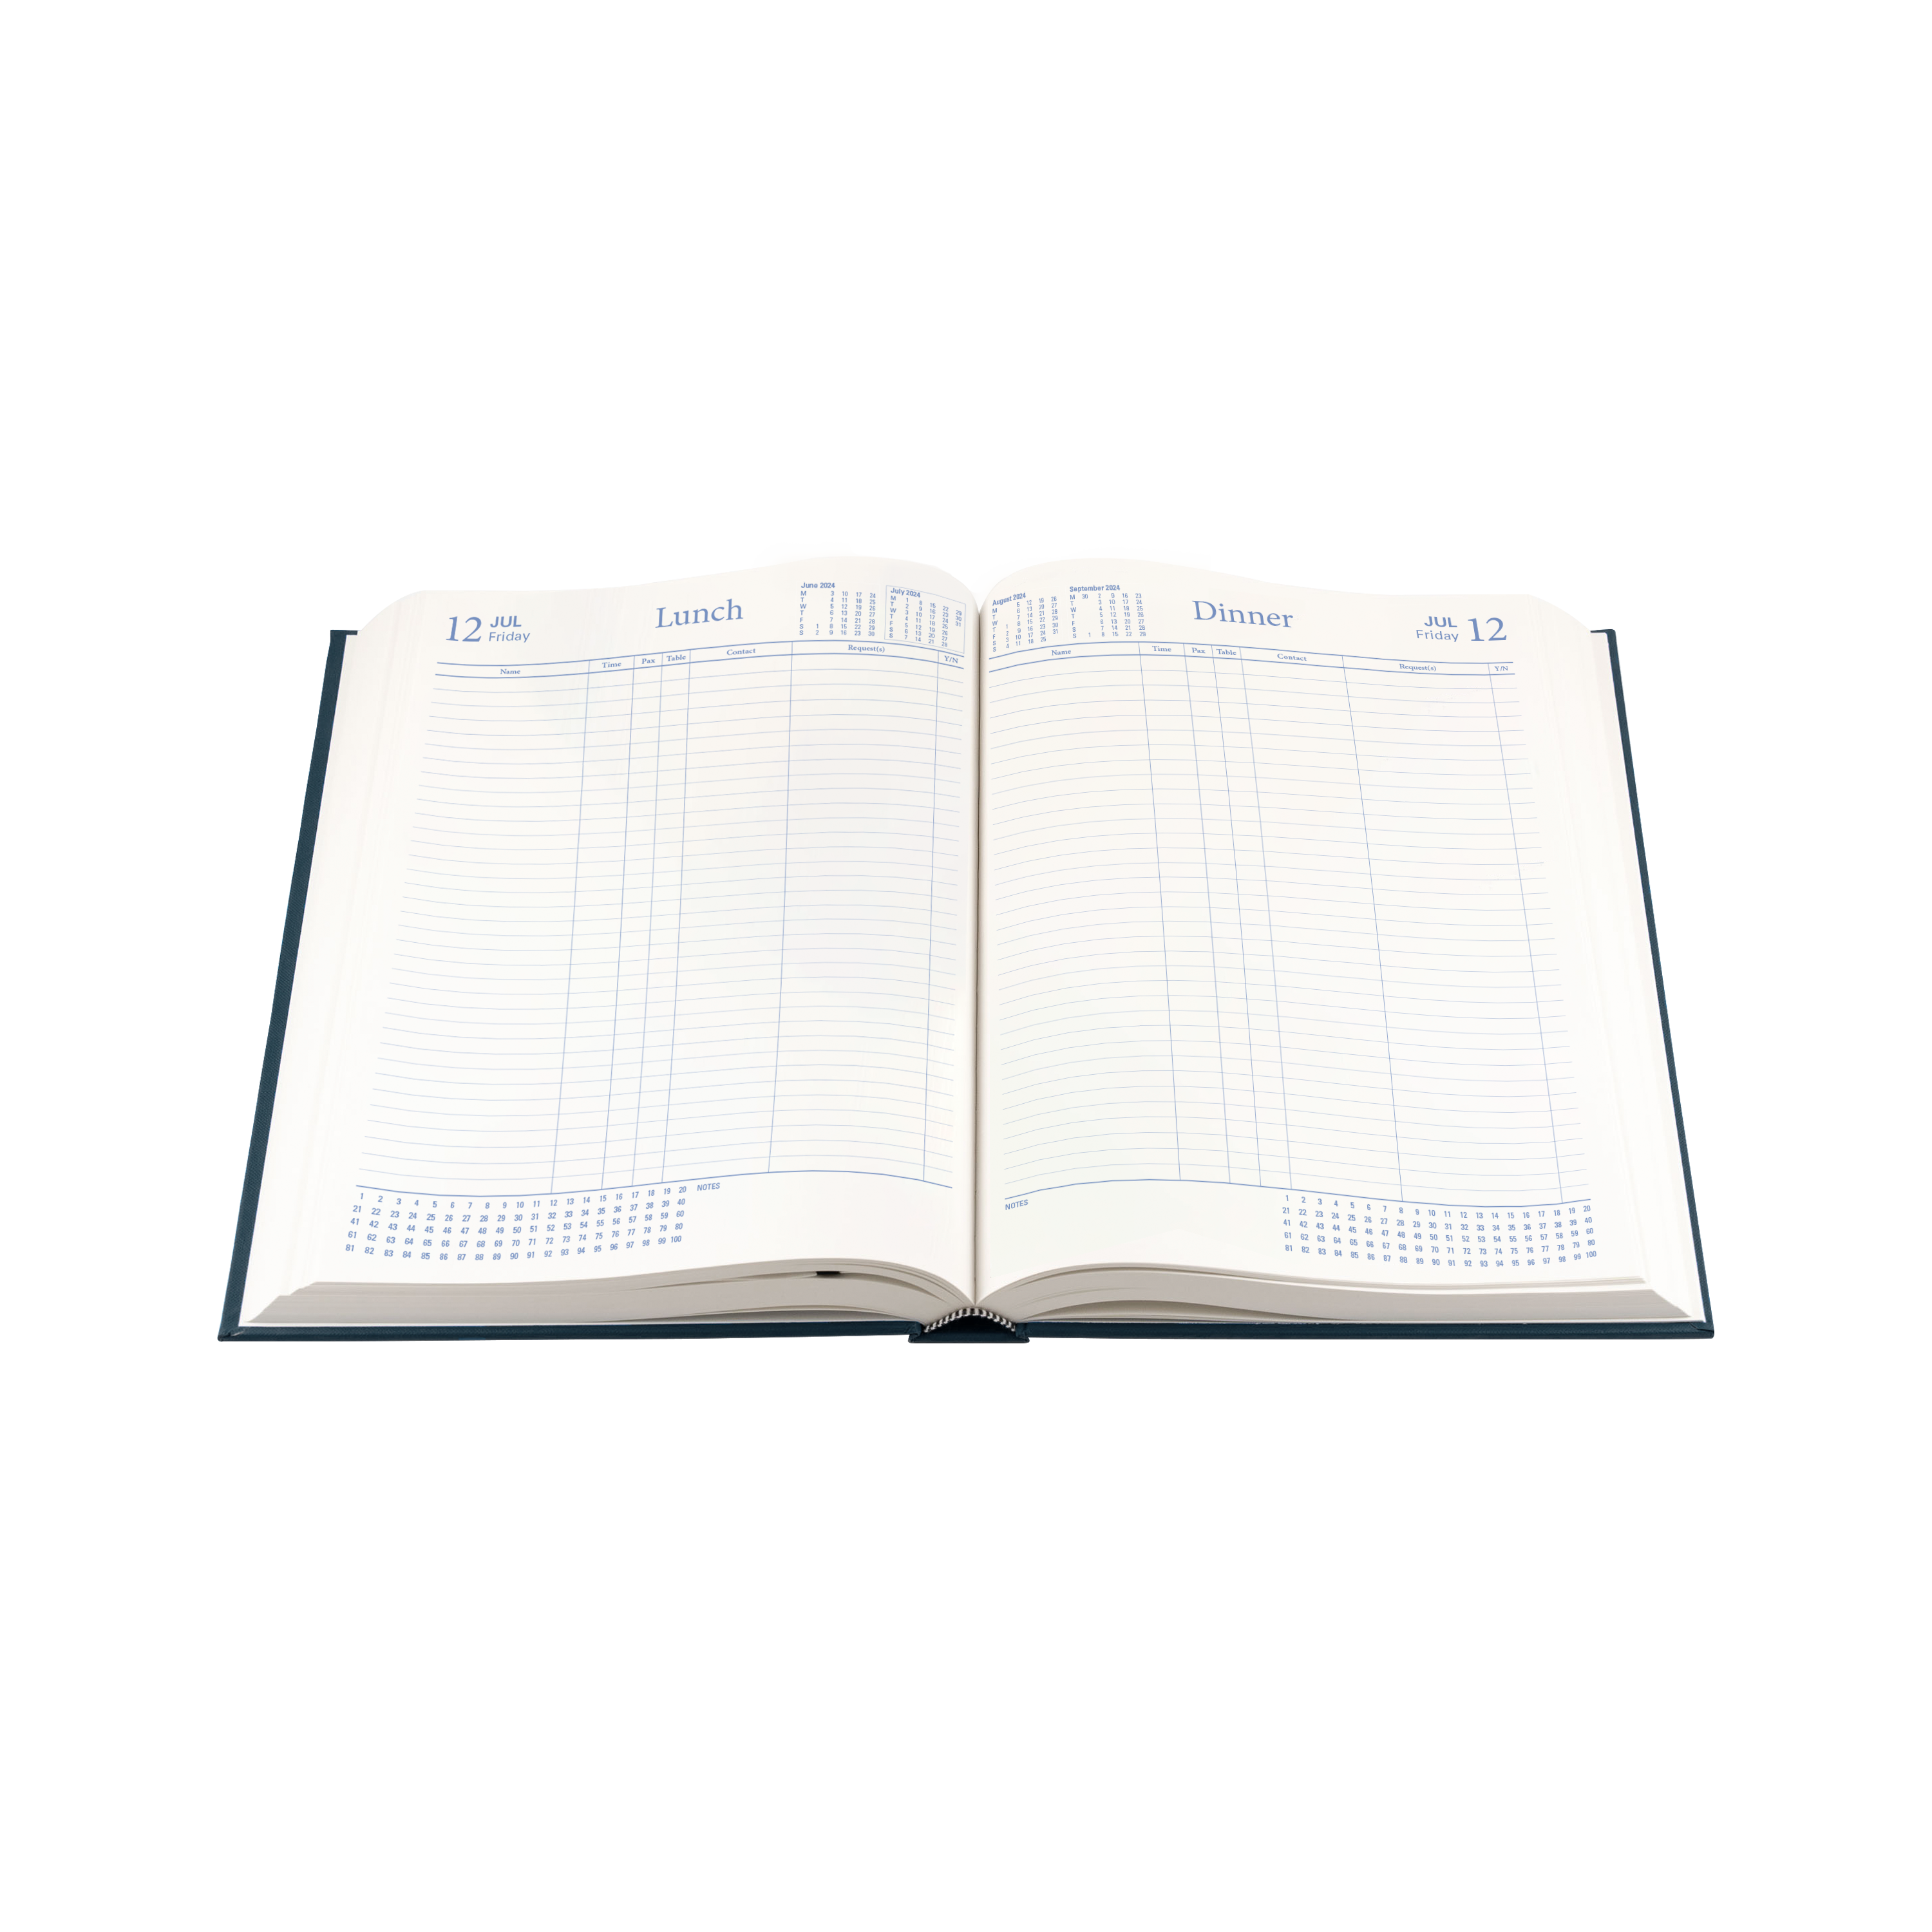 Table Bookings 2024 Diary - 2 pages to a day (Lunch & Dinner), Size A4